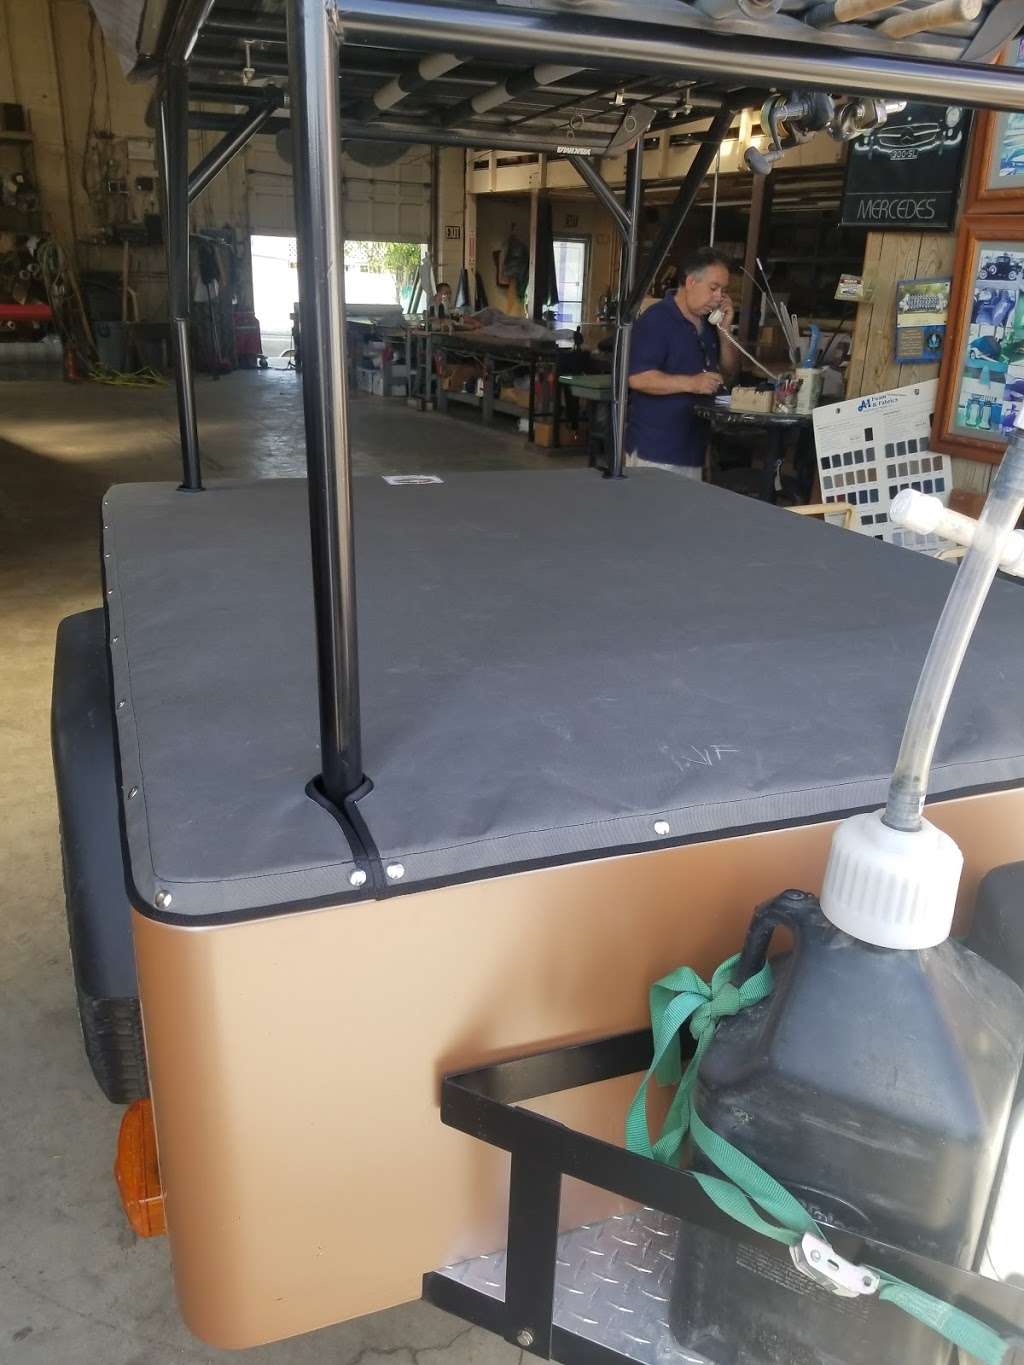 Mikes Canvas Boat Covers &Upholstery | 14056 Whittier Blvd, Whittier, CA 90605 | Phone: (562) 693-1761